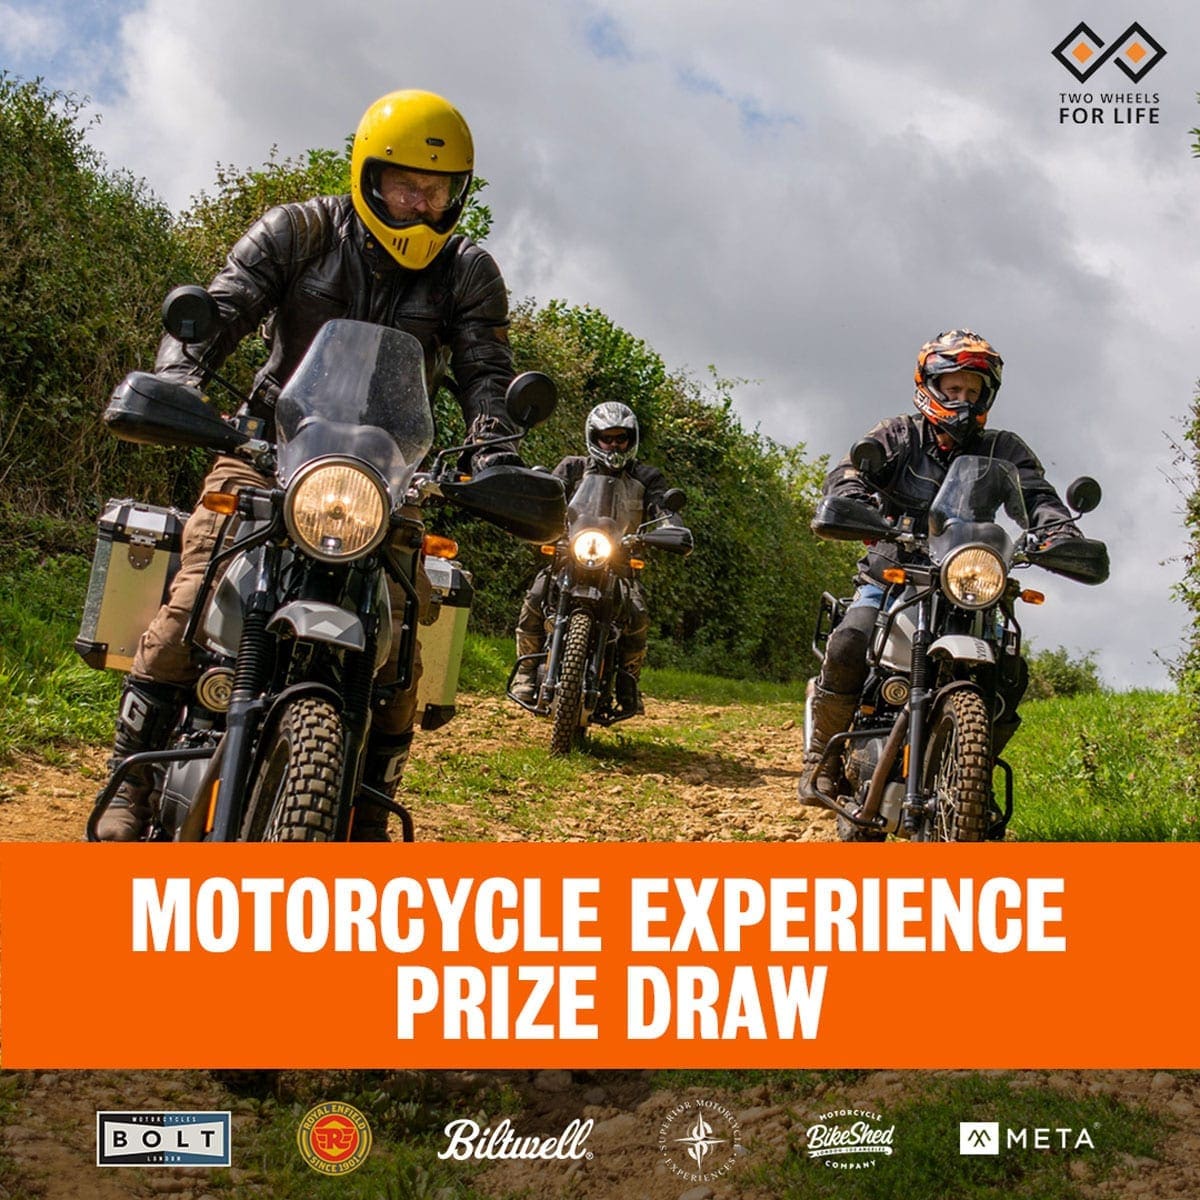 Win Royal Enfield Riding Experience in MotoGP prize draw